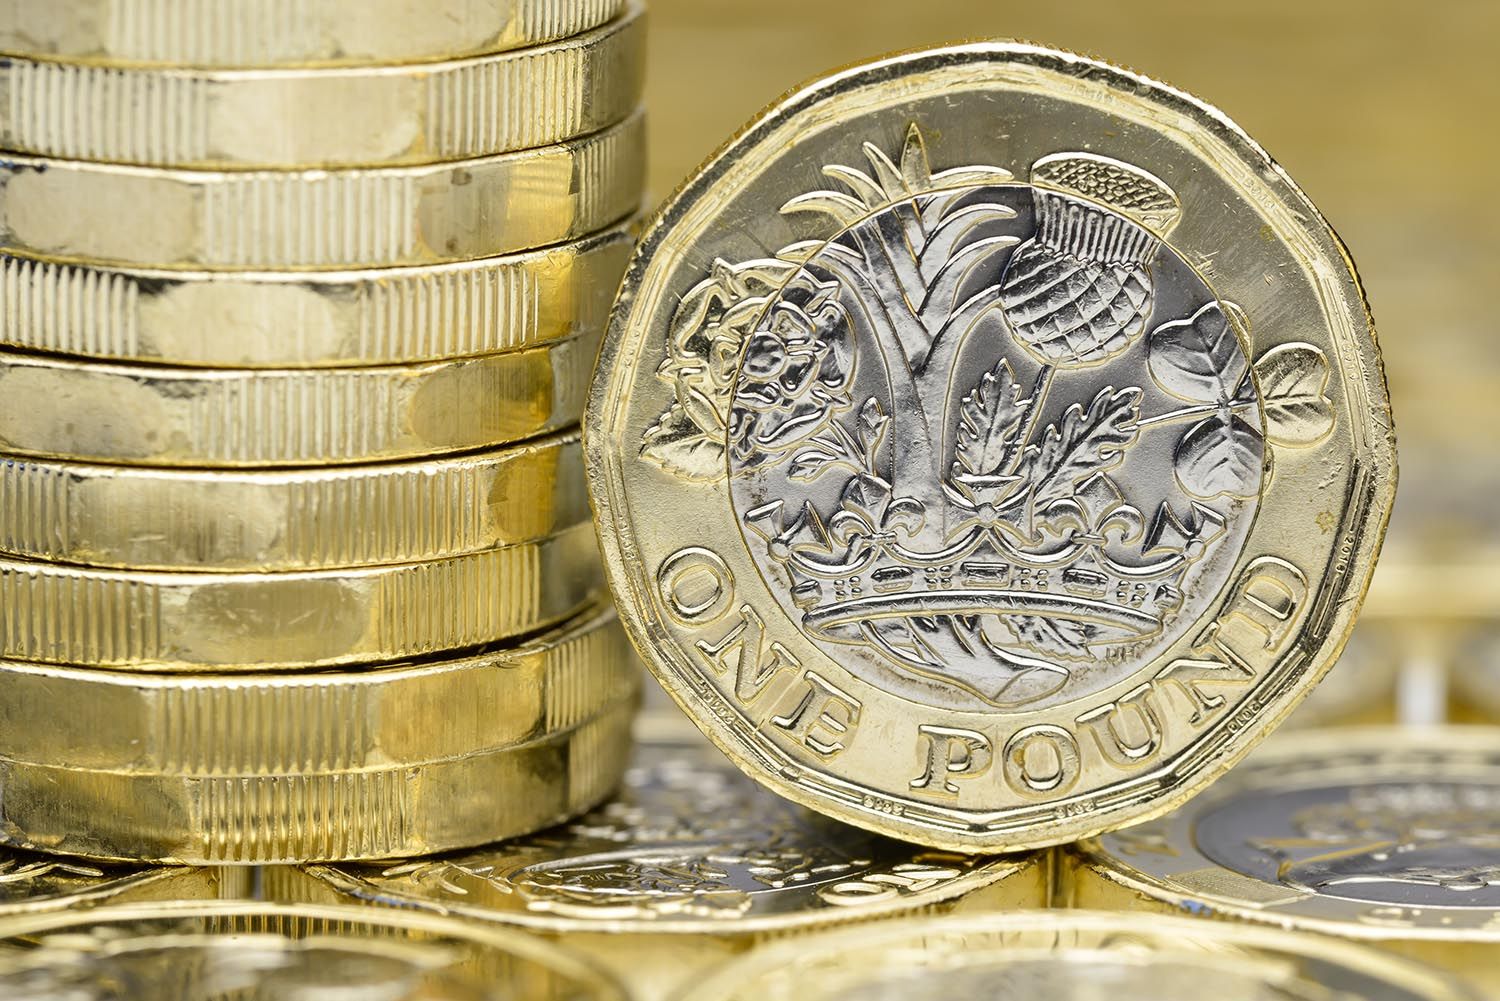 Pound to Euro Week Ahead Forecast: Risk of Central Bank Divergence Constrains